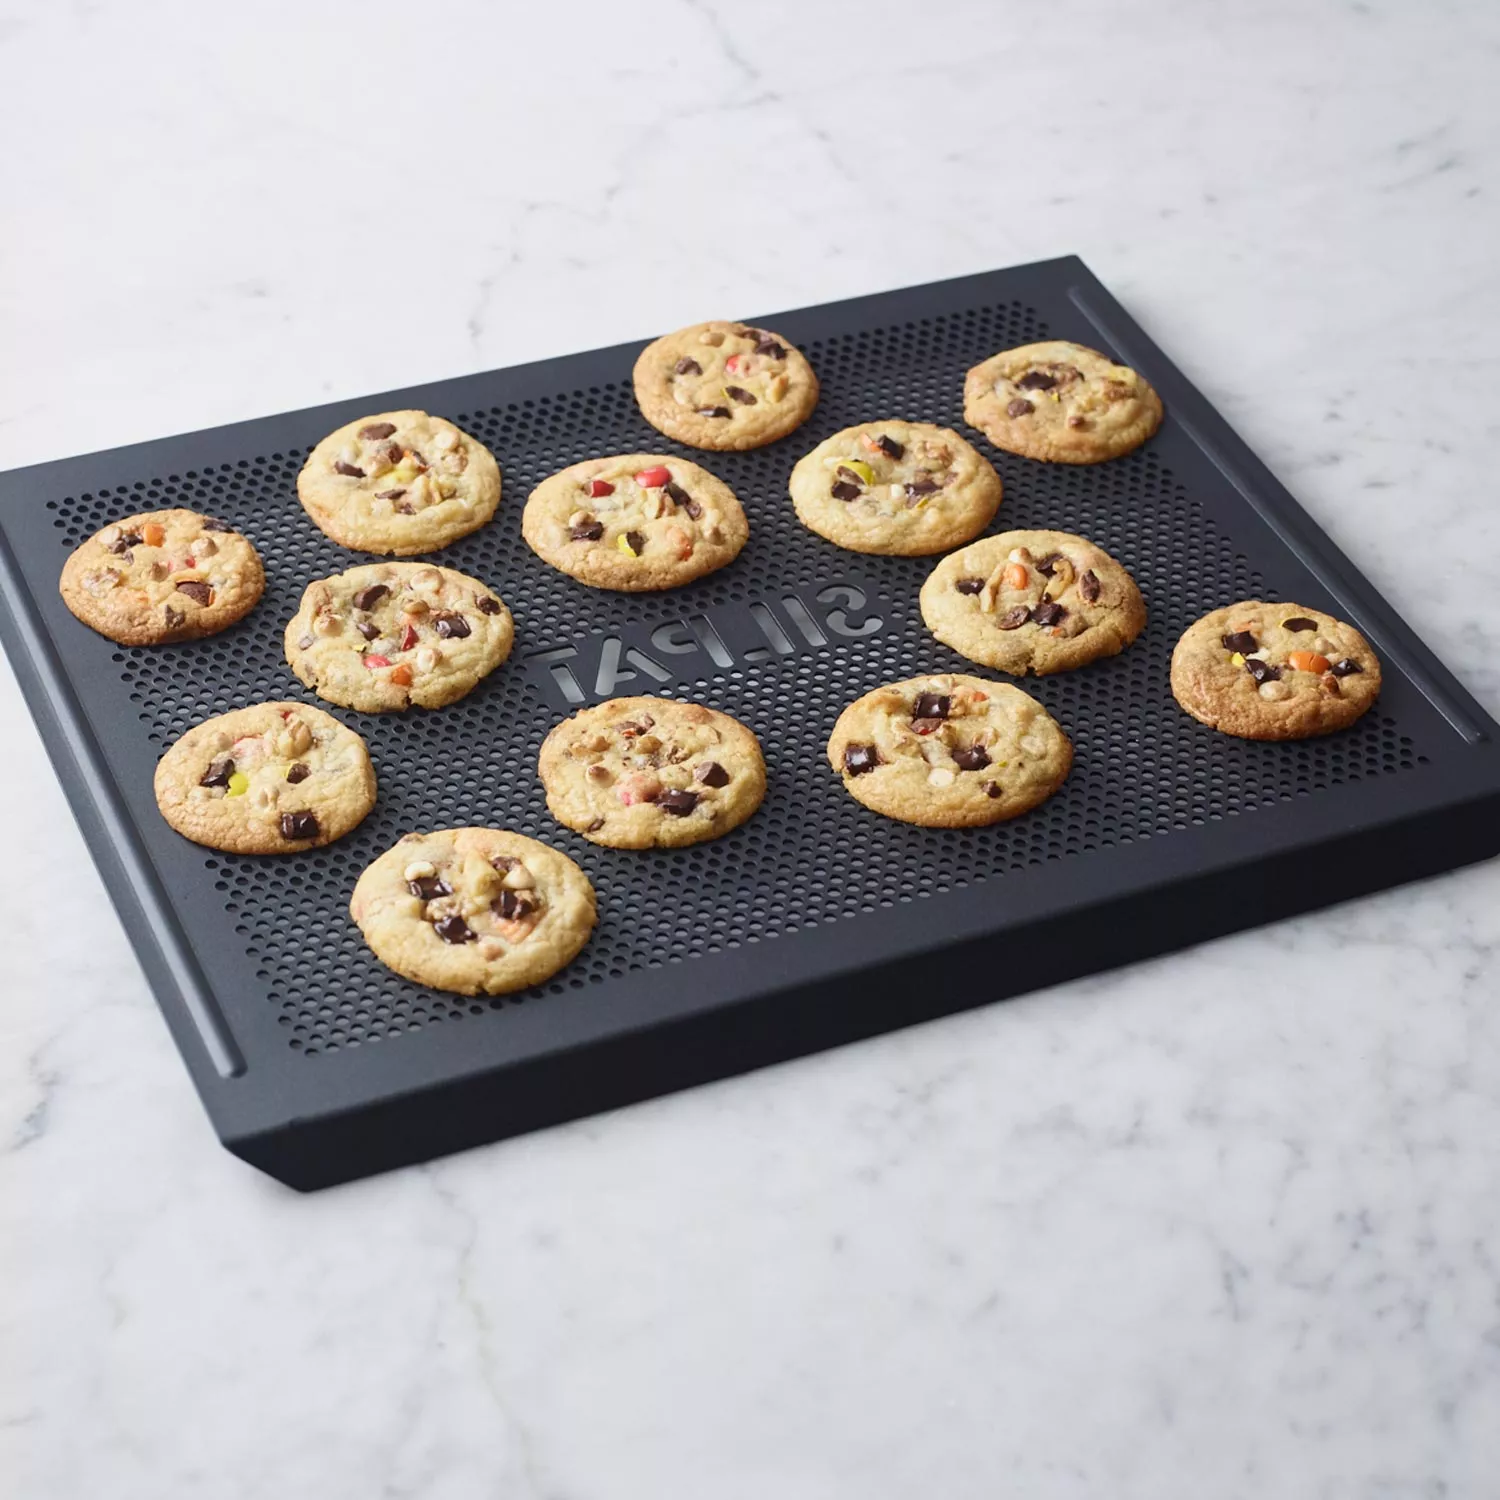 Silpat Perforated Baking Tray